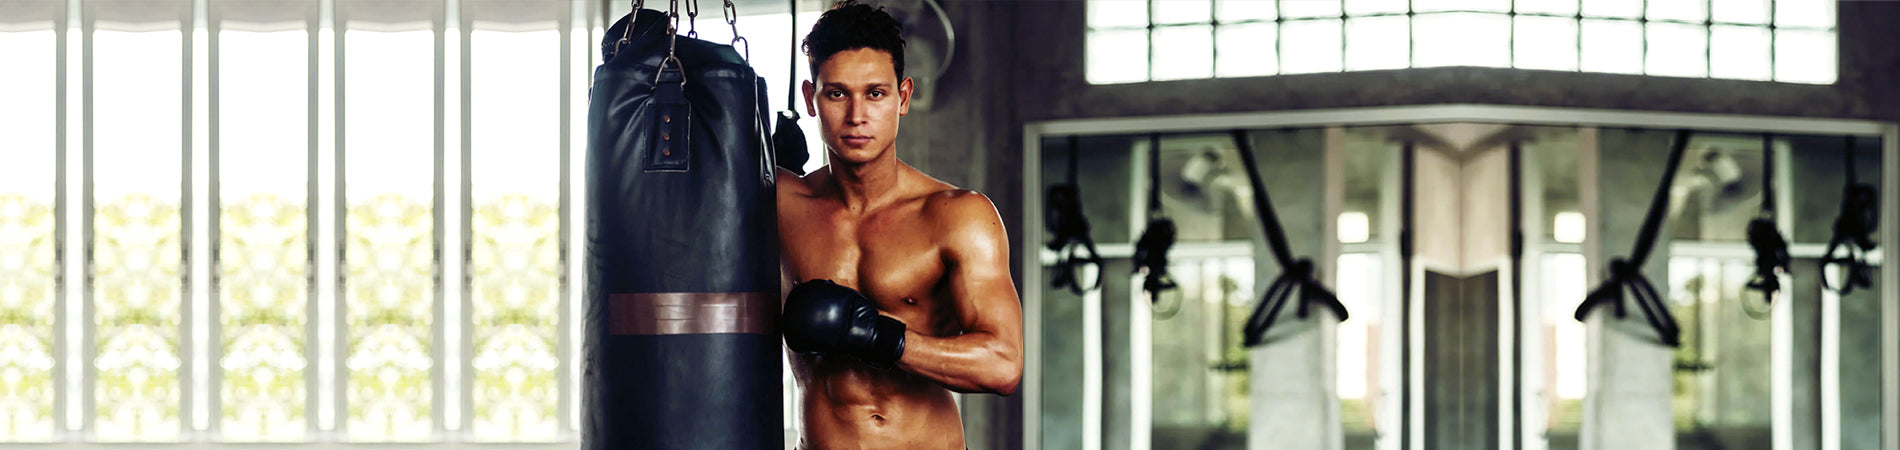 Beginners Guide: Boxing Workouts for Weight Loss at Home